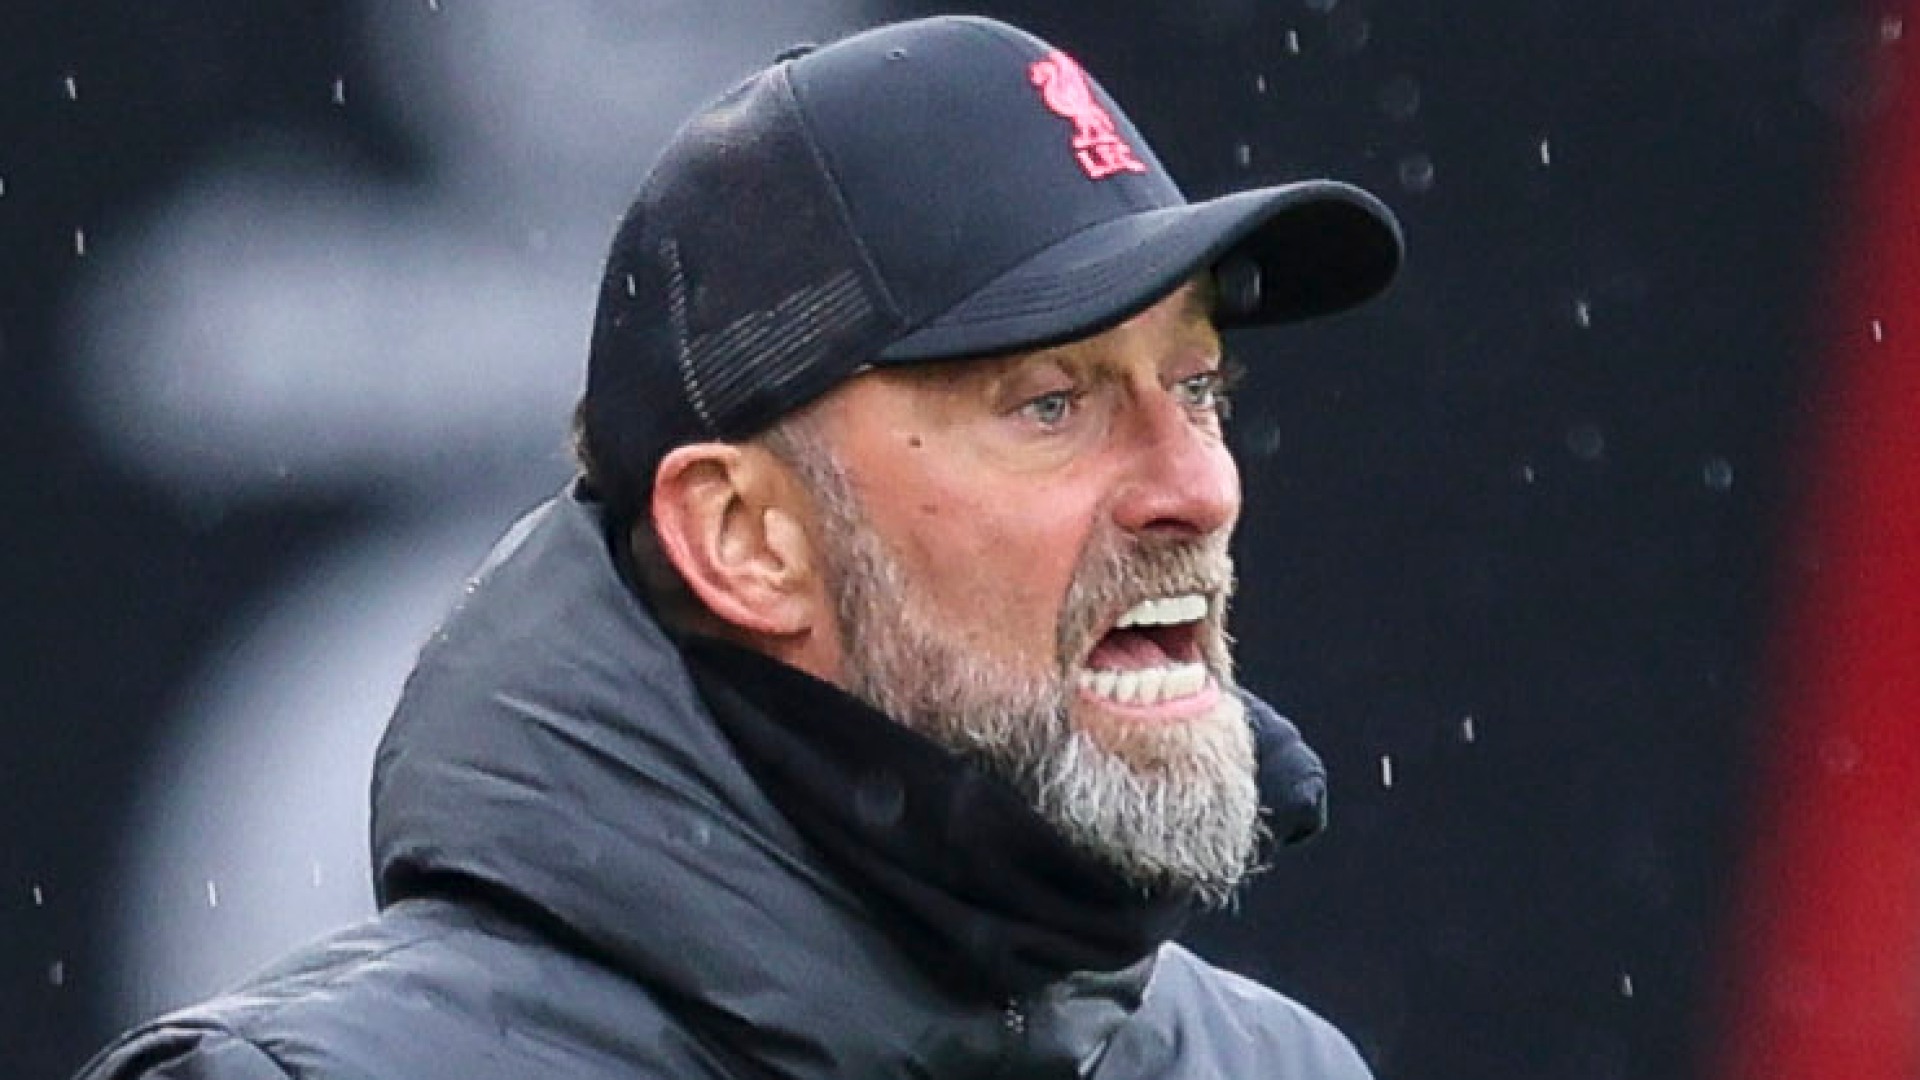 'A s***storm' - Liverpool boss Jurgen Klopp hits out at the BBC over Gary Lineker row as he defends Match of the Day presenter